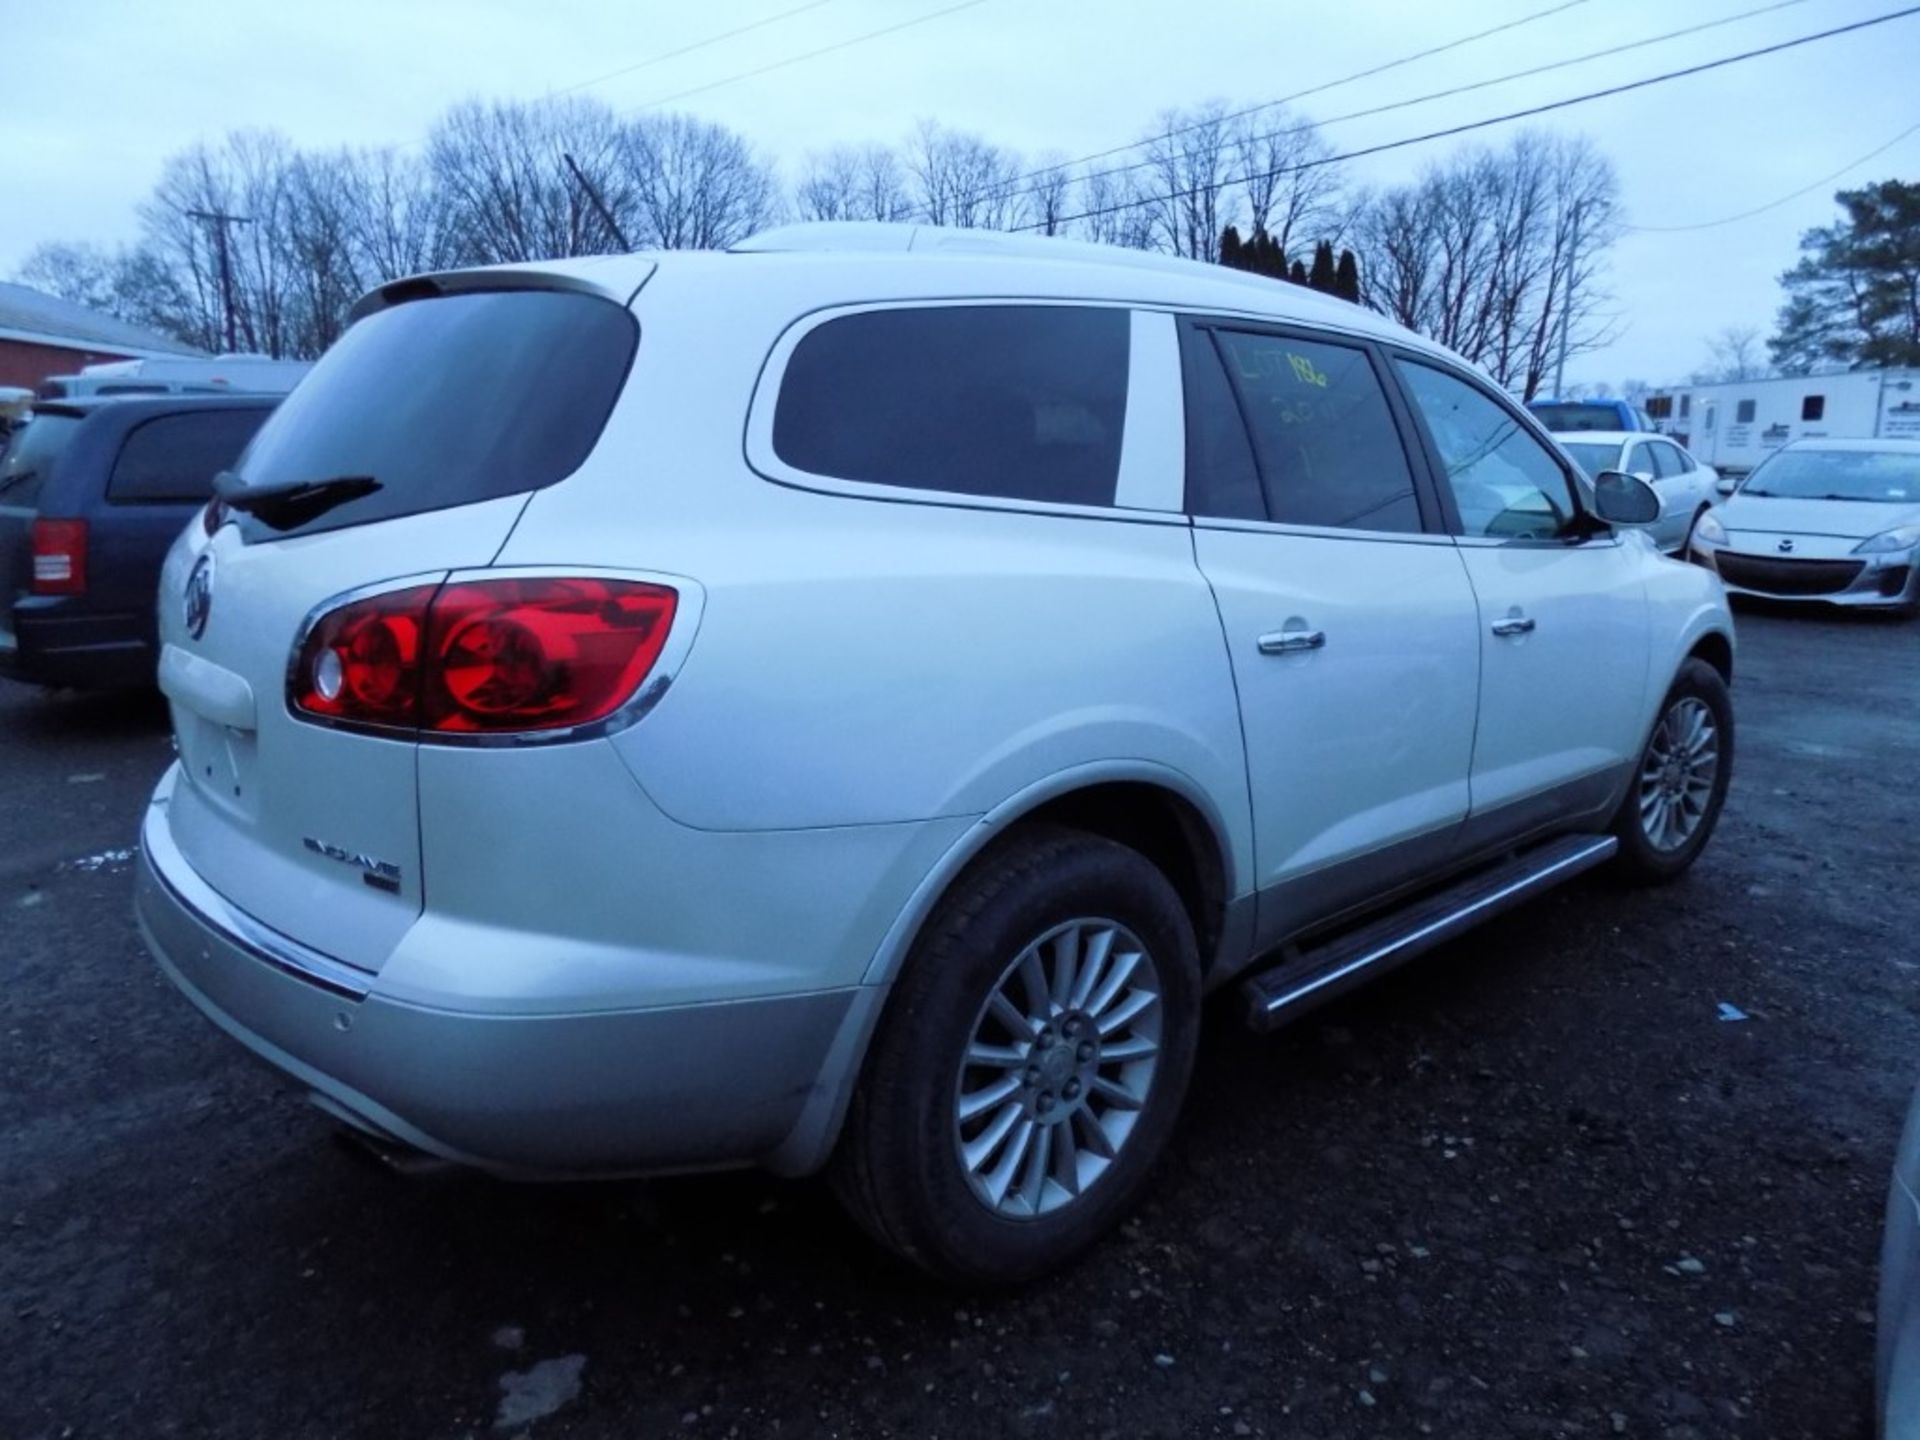 2011 Buick Enclave CXL-1, Leather, Sunroof, Front Wheel Drive, White, 160,845 Mi, PASSENGER FRONT - Image 6 of 13